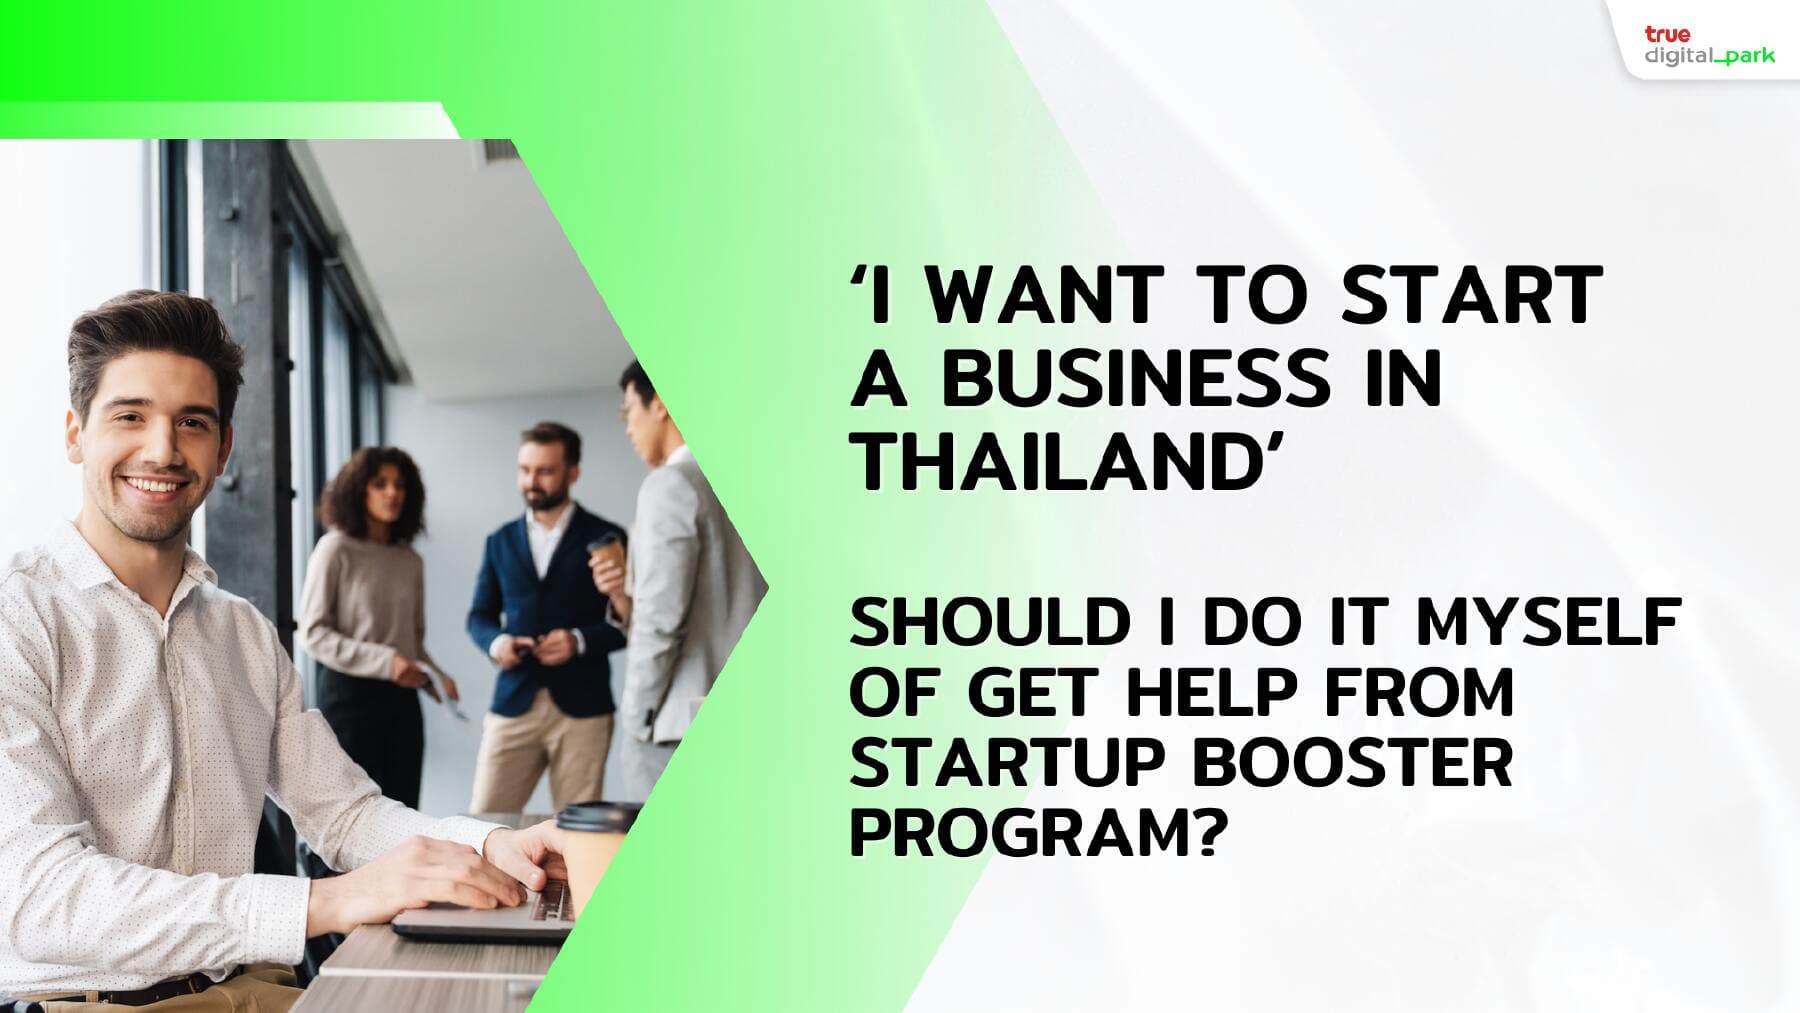 ‘I want to start a business in Thailand’ Should I DIY or get help from Startup Booster Program